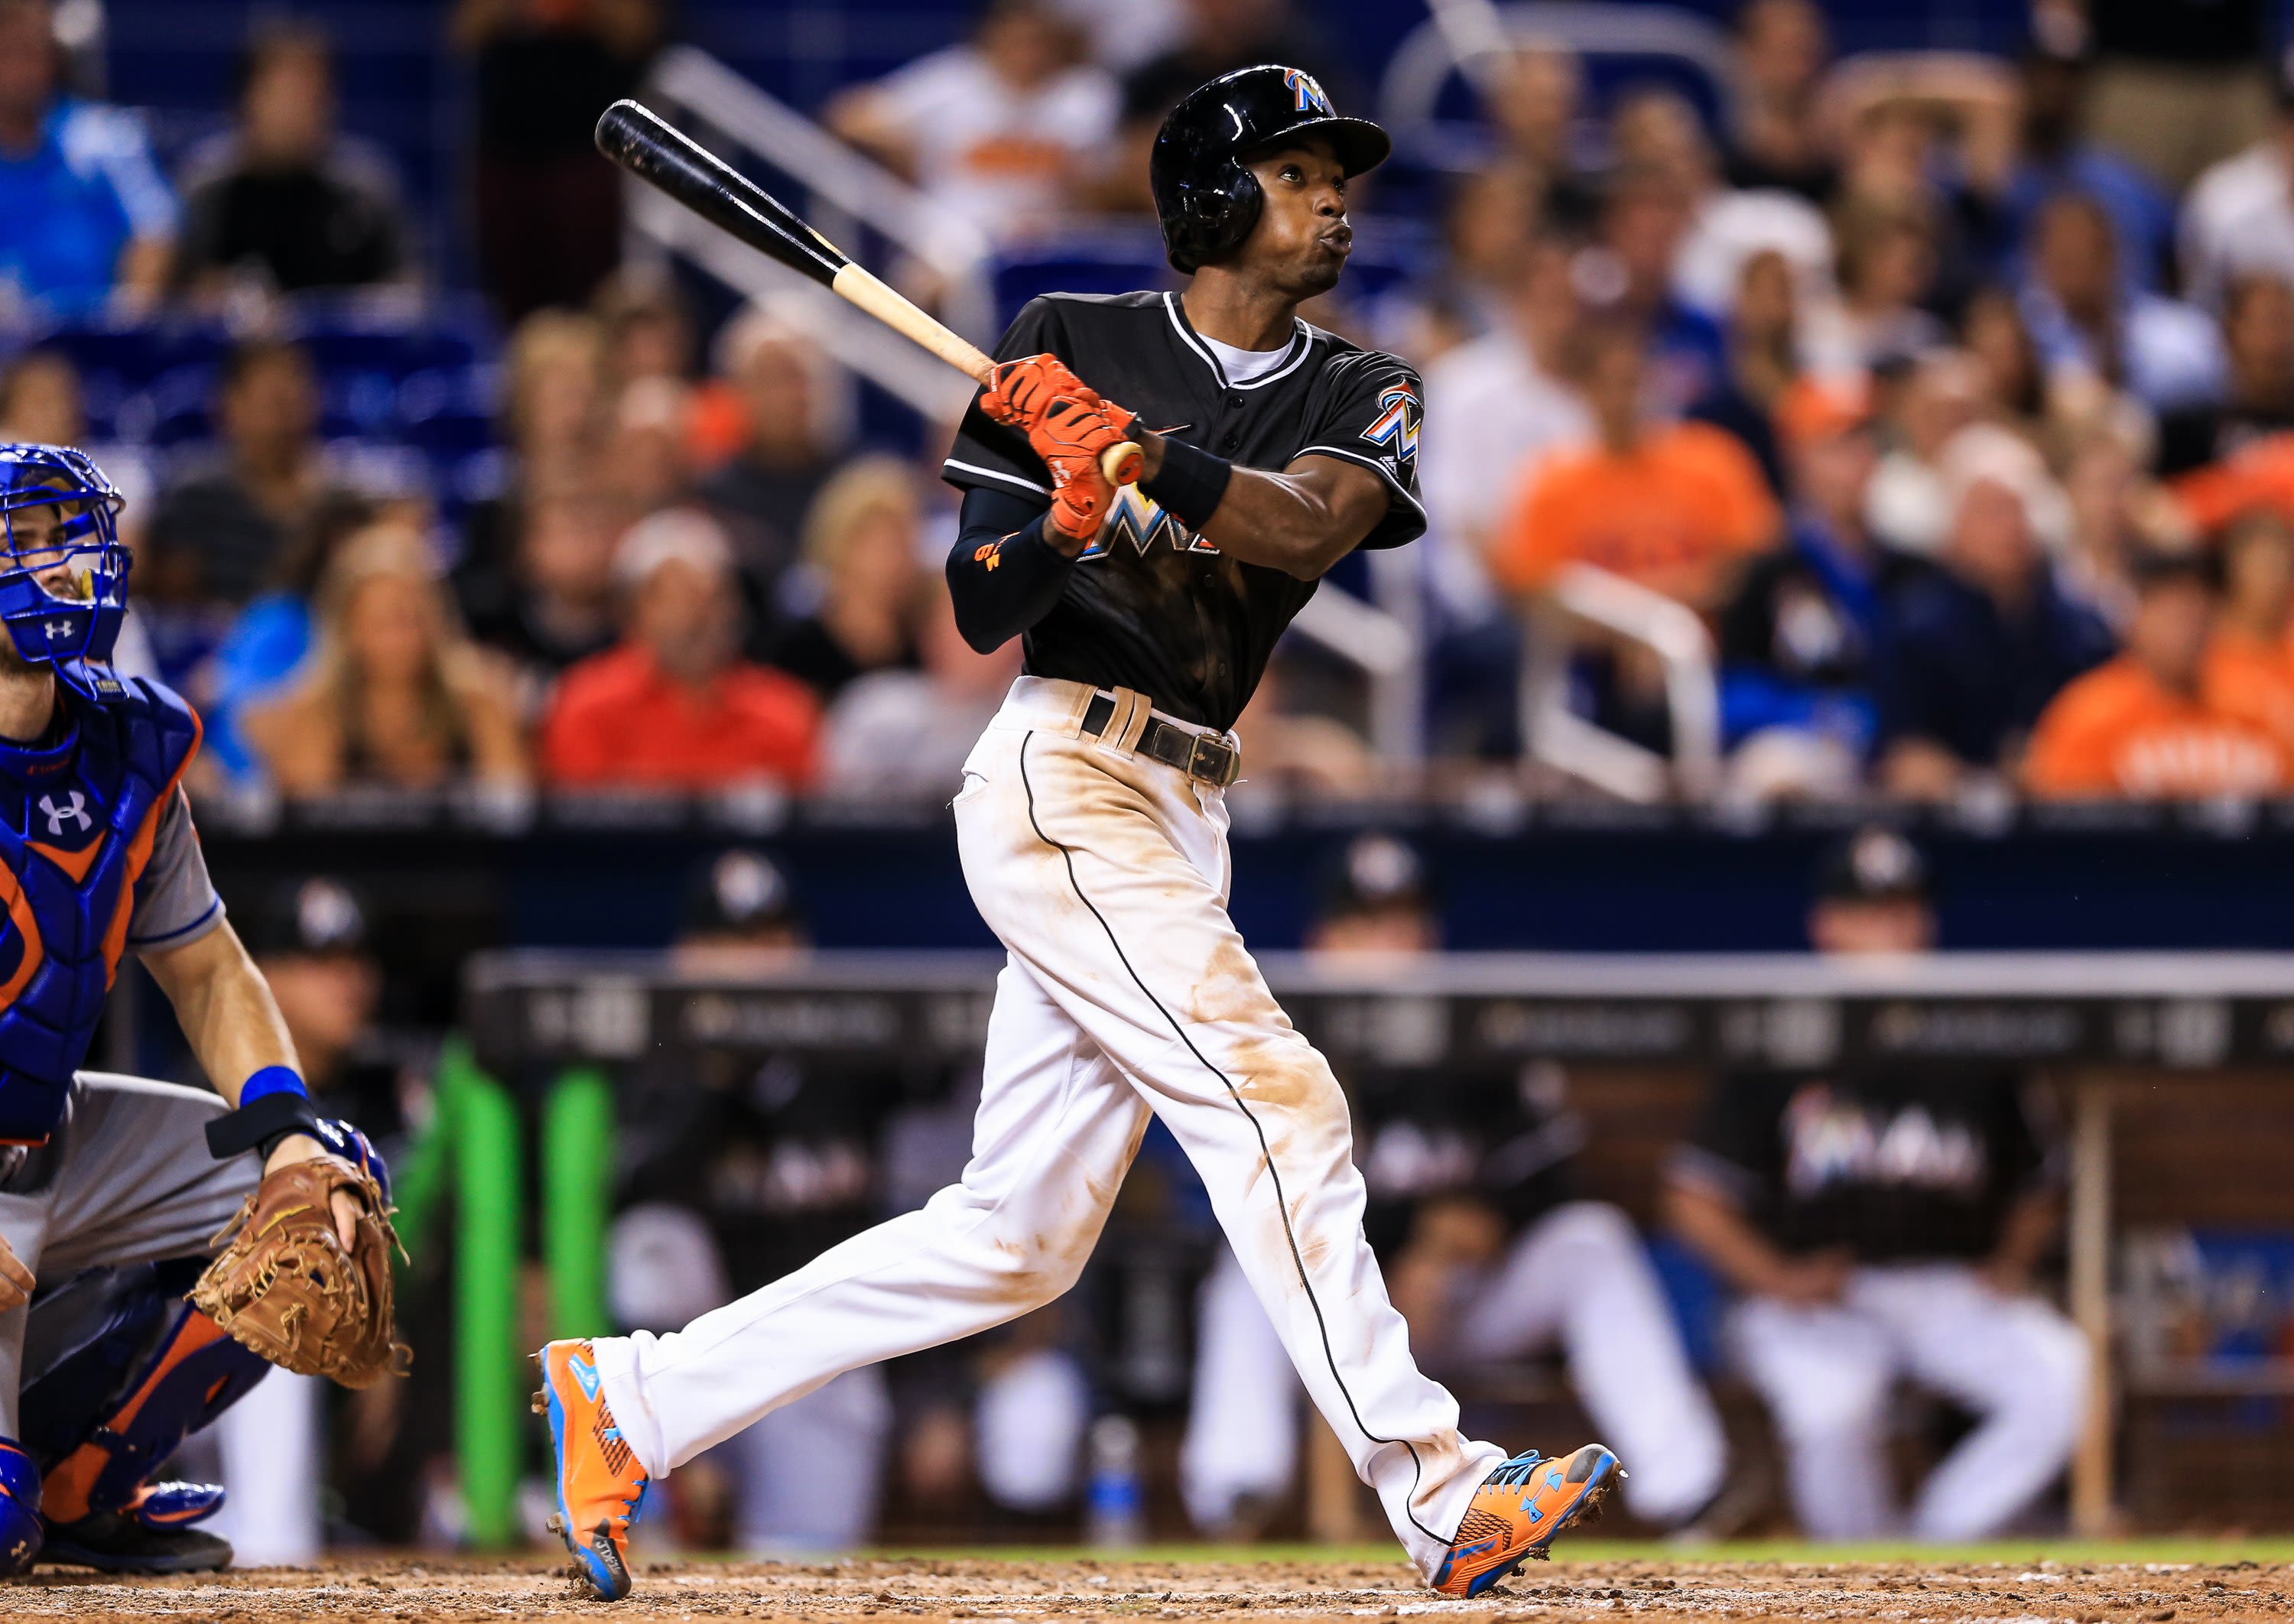 Polk in the Pros: Dee Gordon heats up for the Marlins